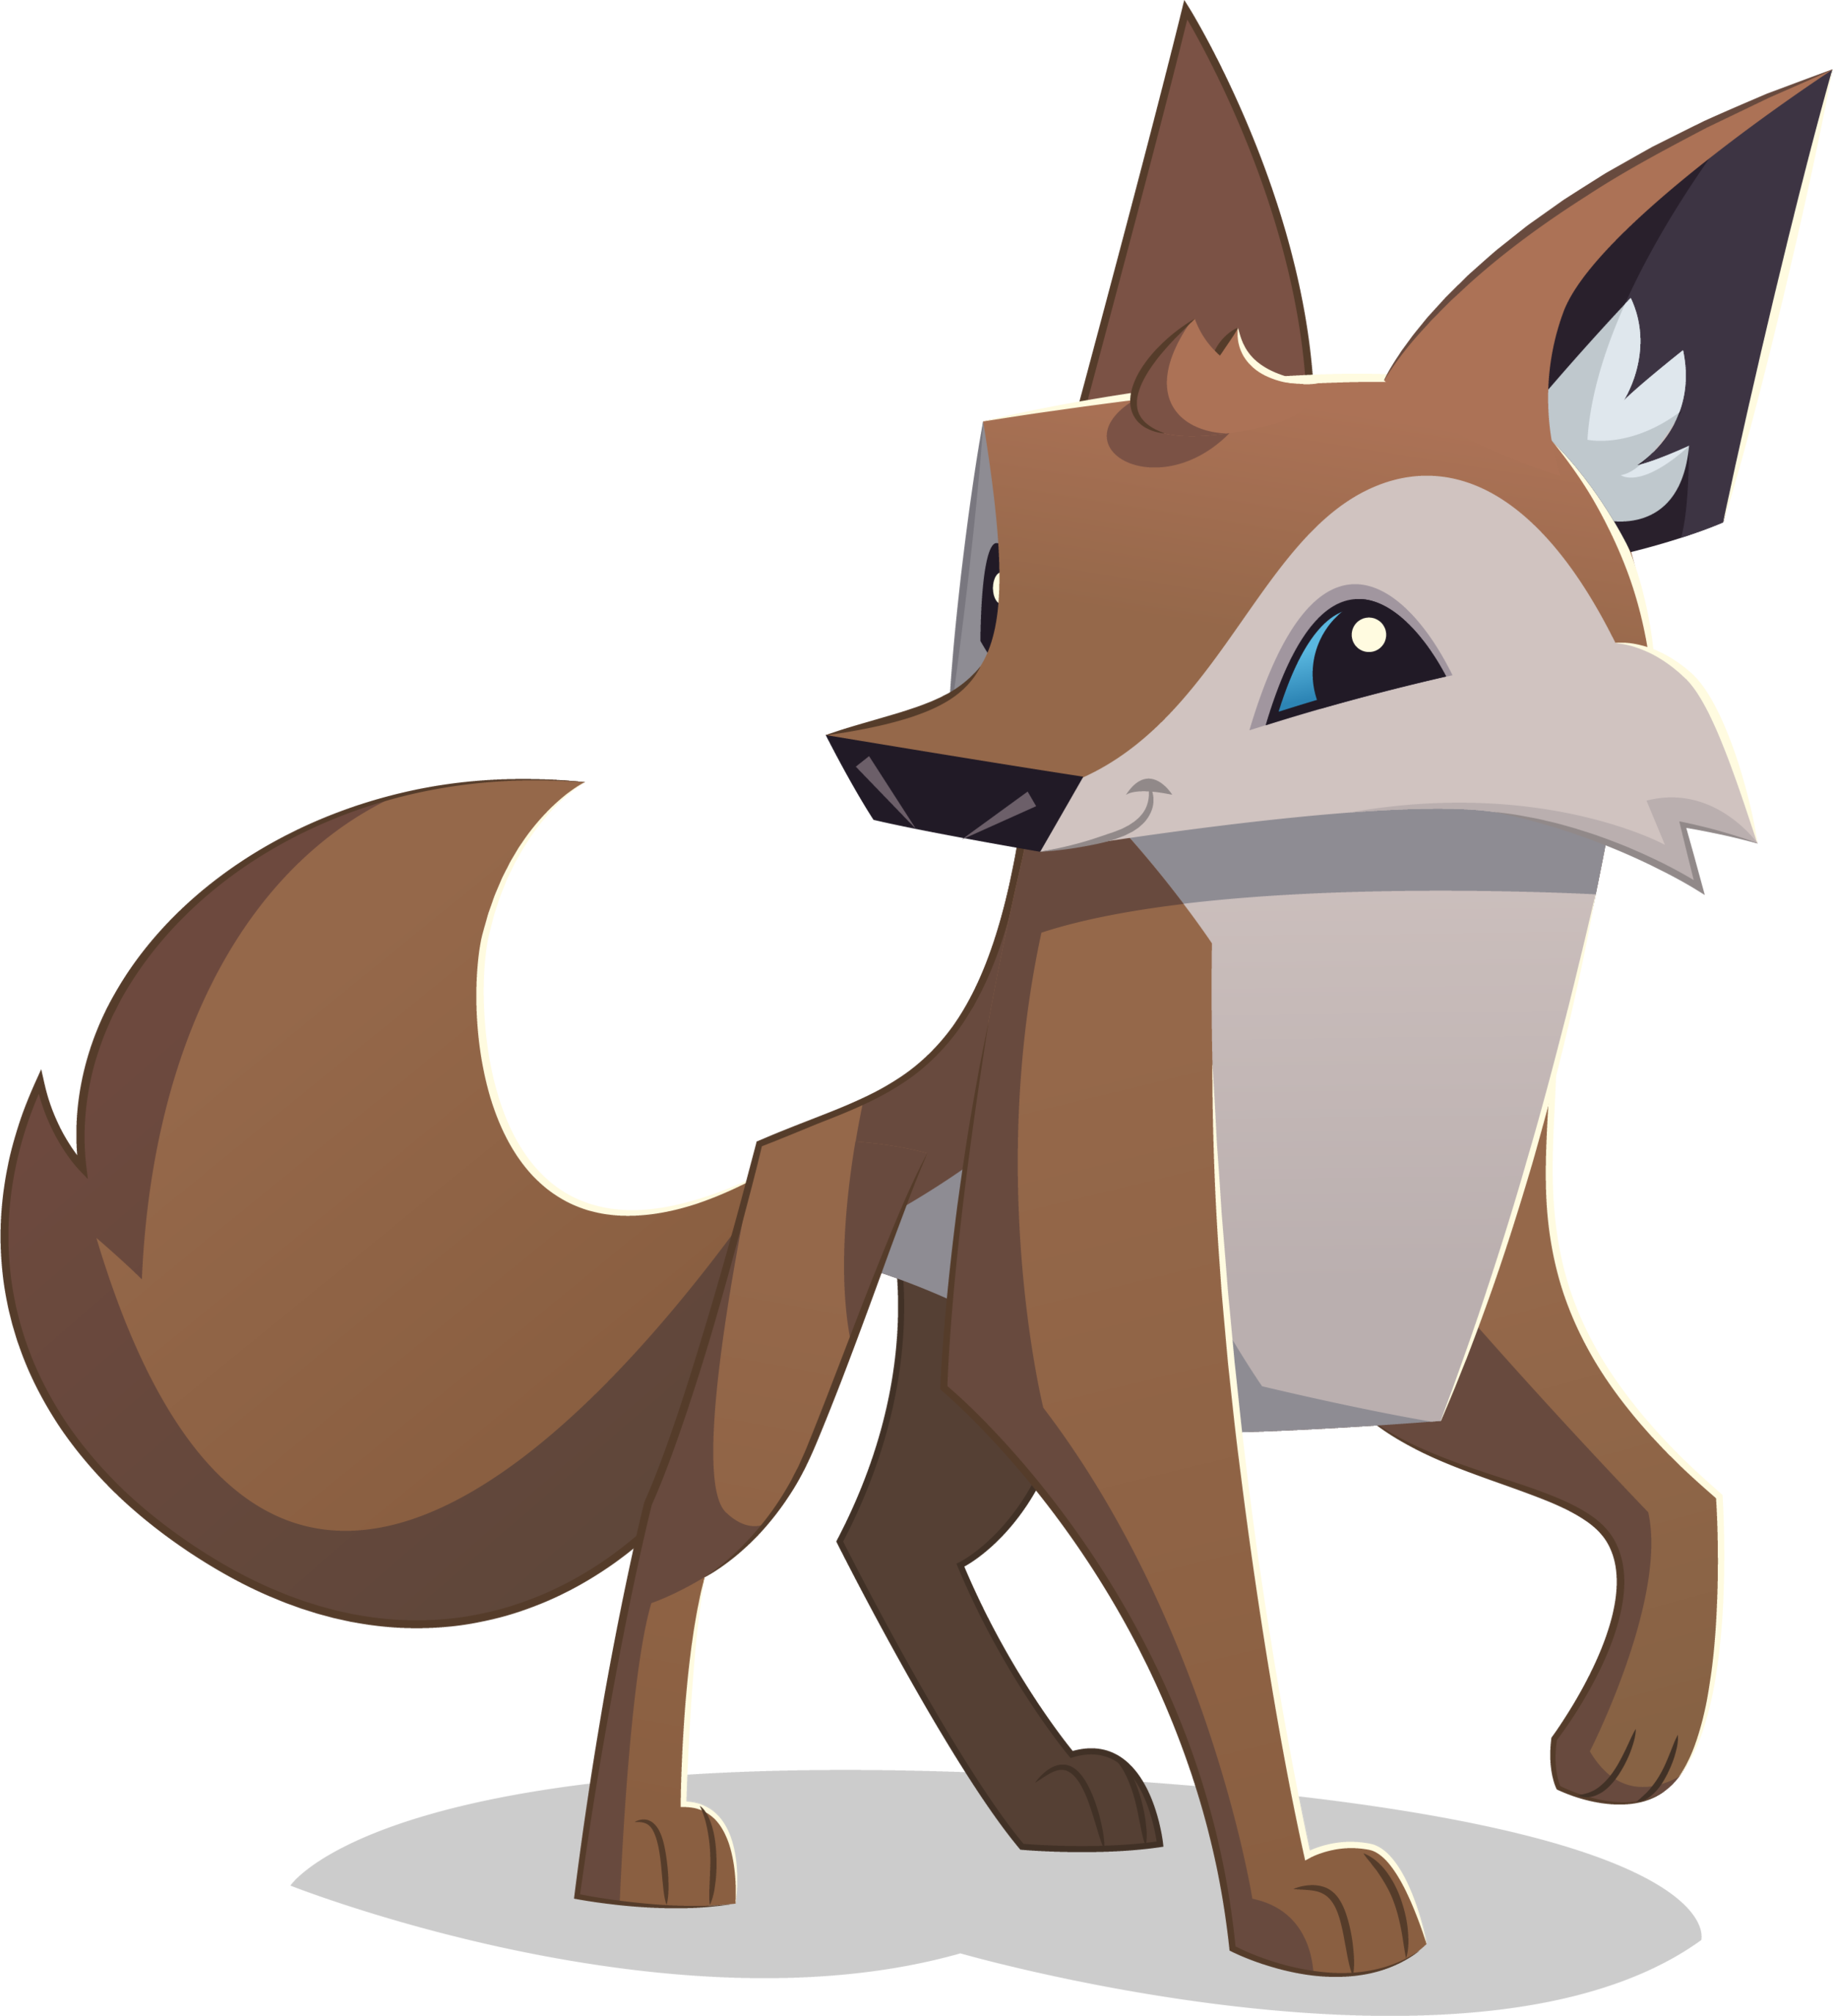 Animated Coyote Character Illustration